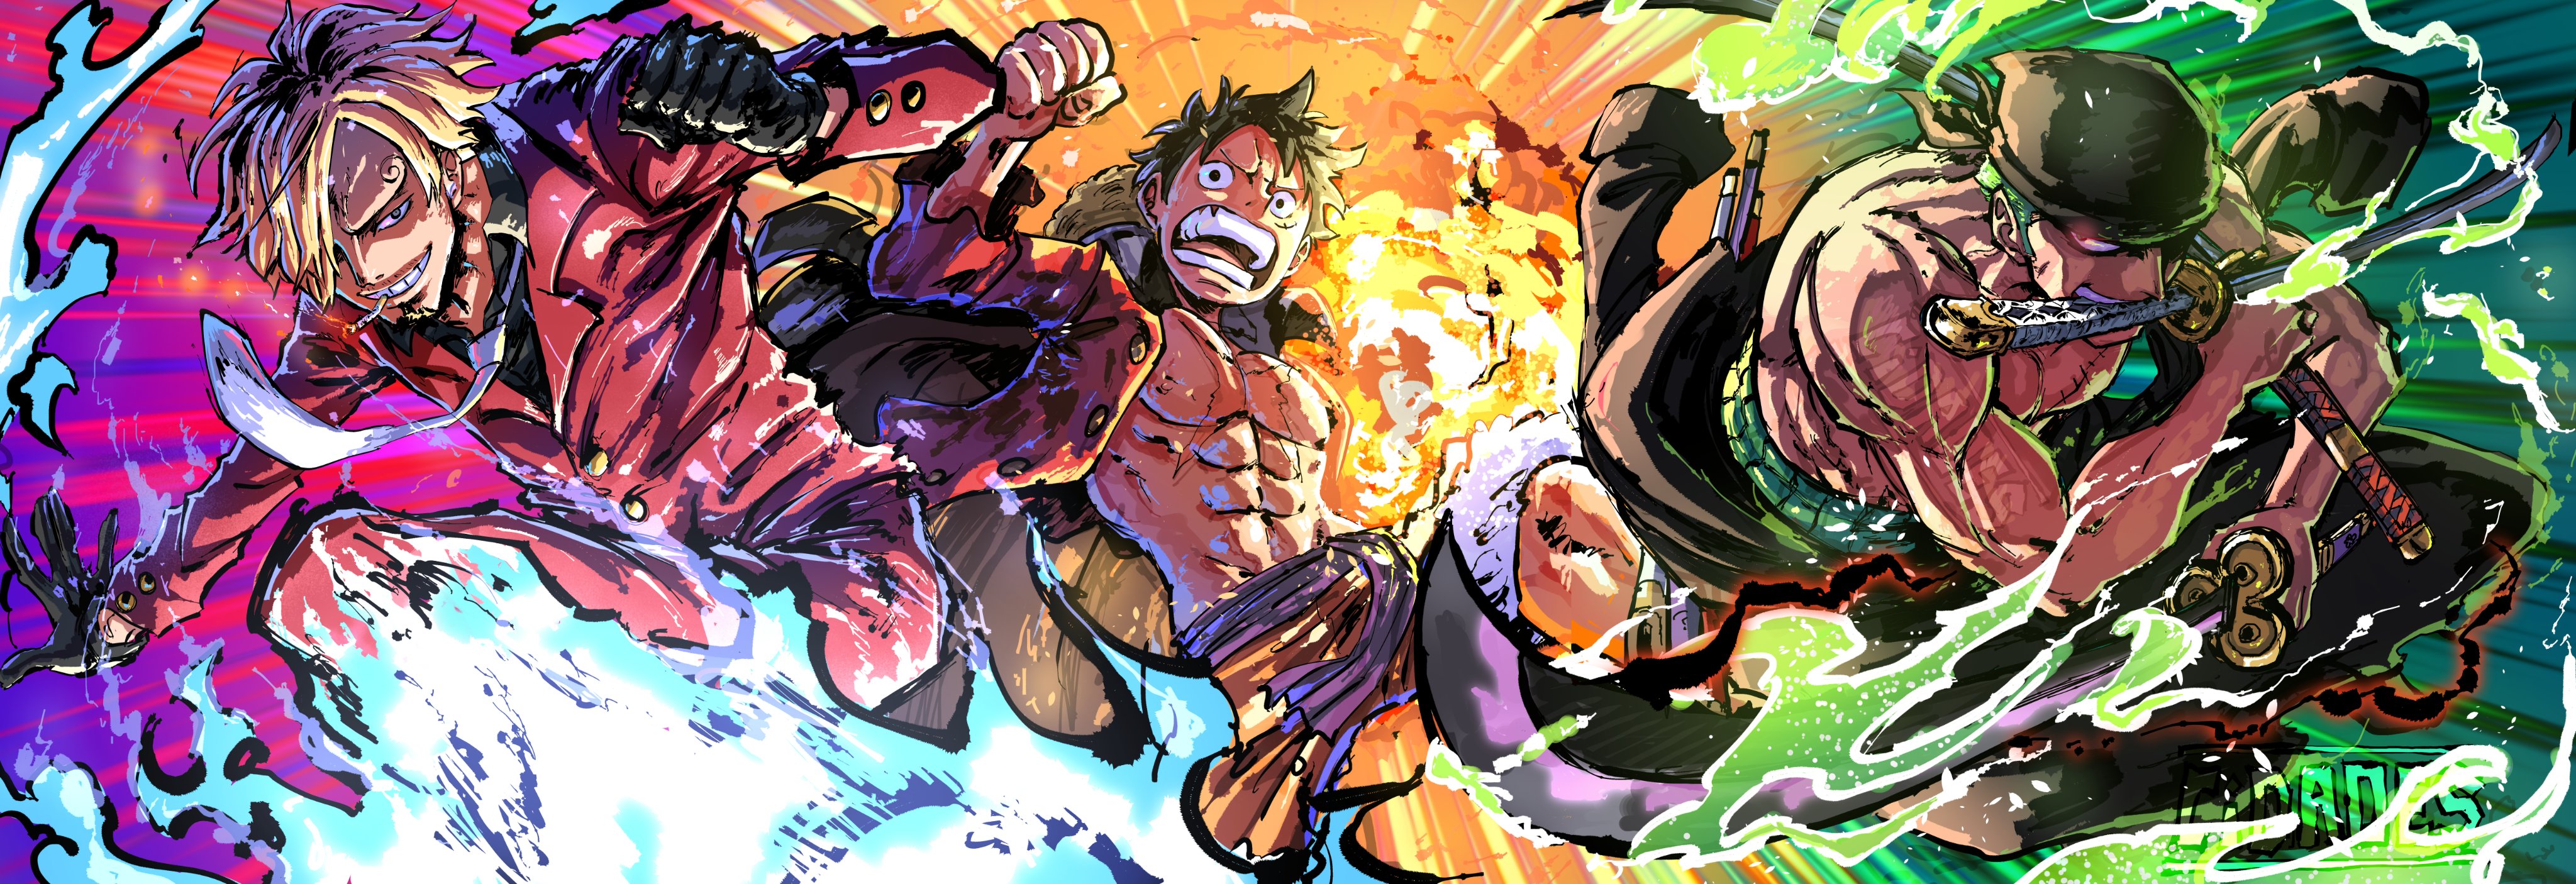 Monster Trio Wallpapers - Wallpaper Cave